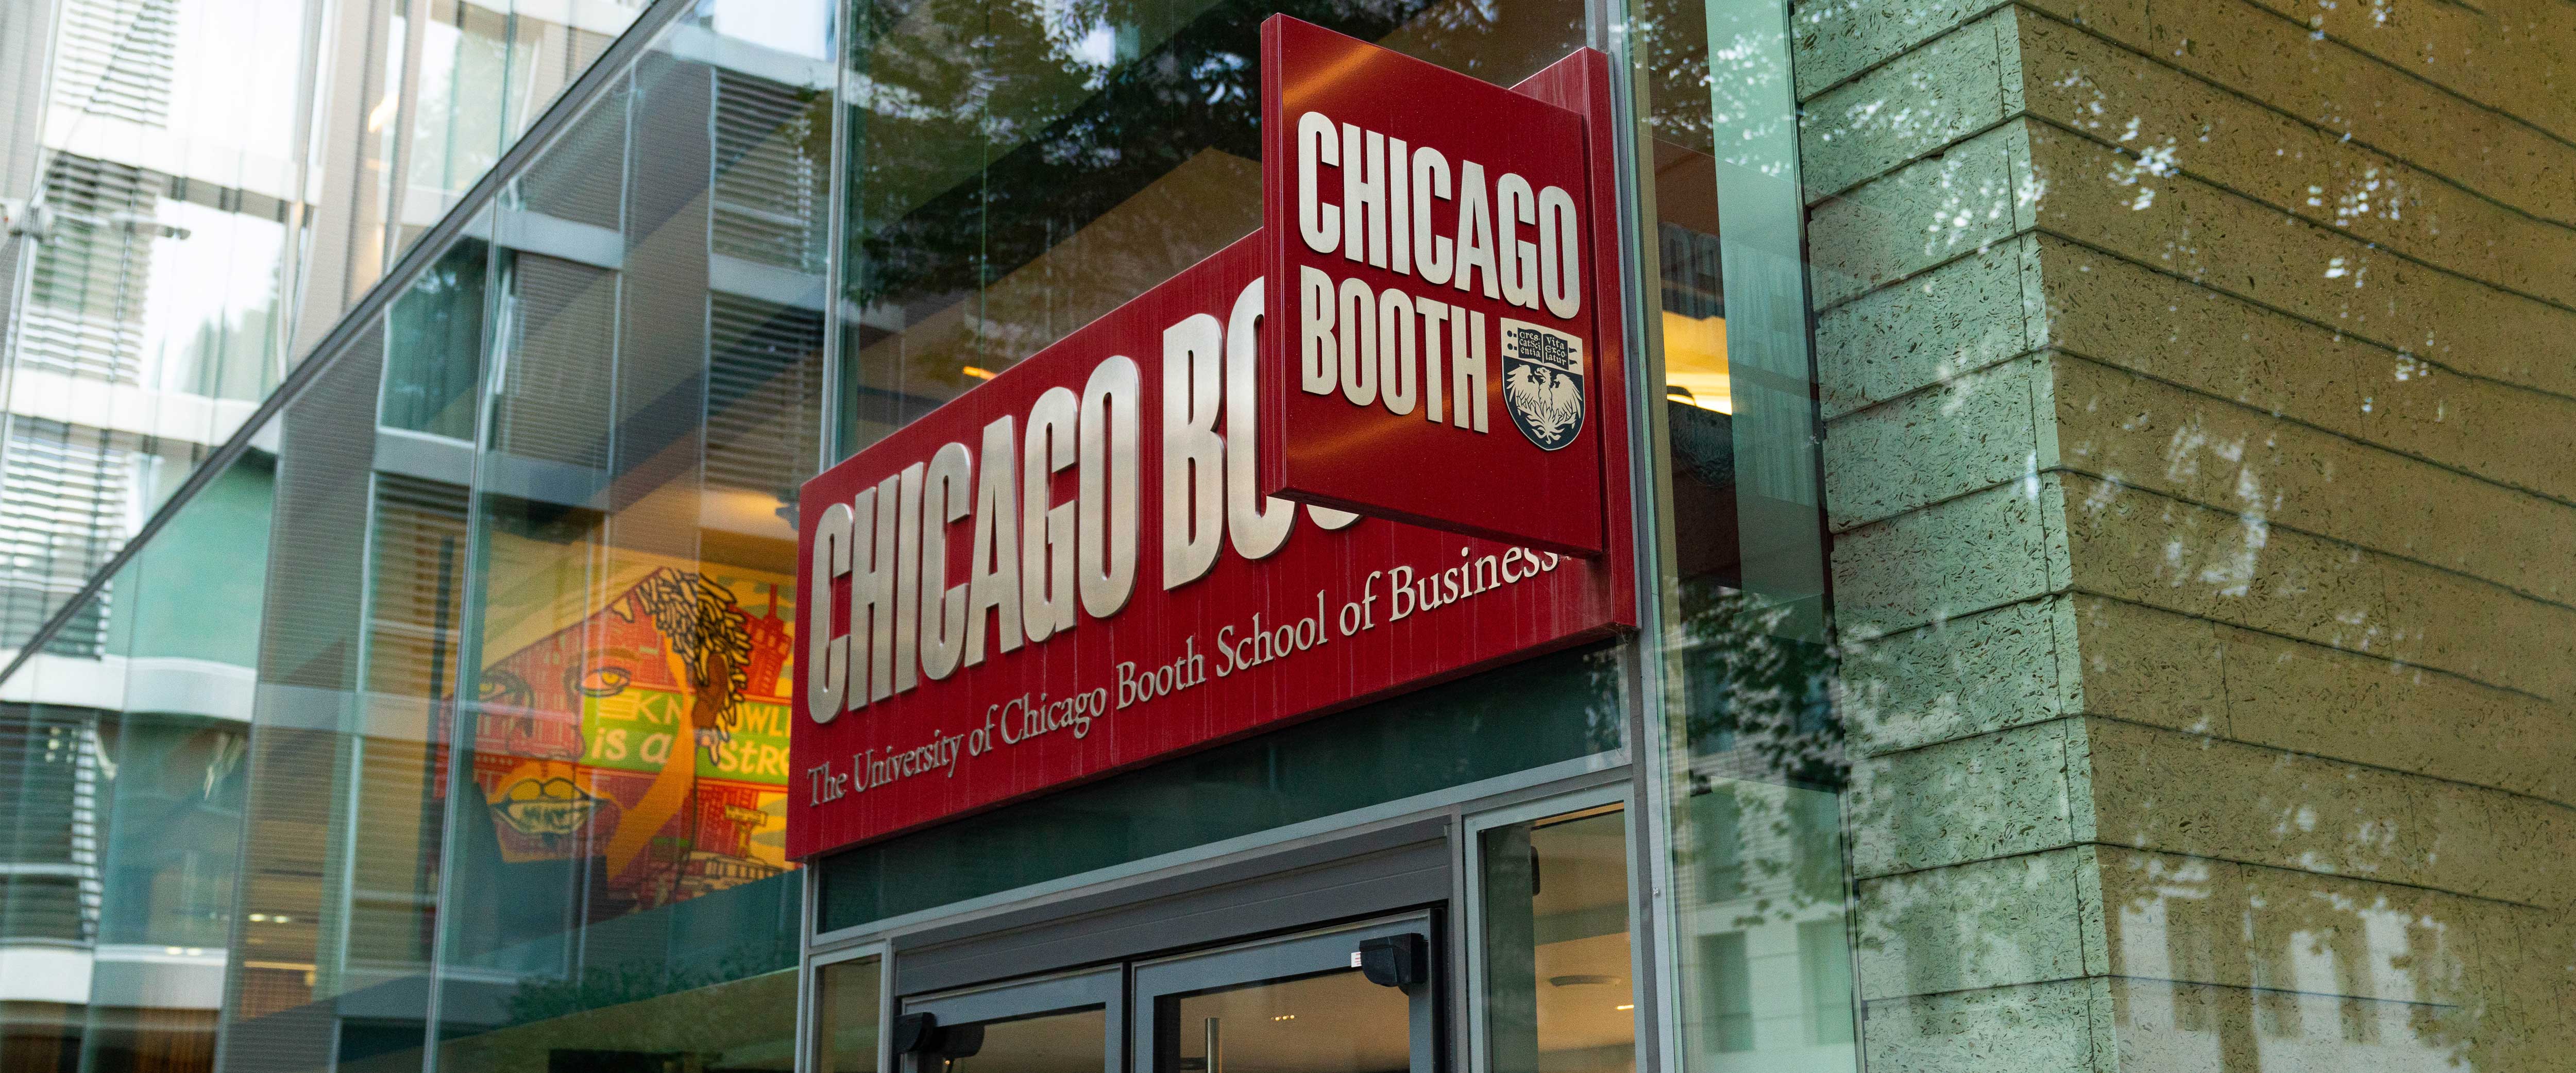 Entrance to the Chicago Booth London campus